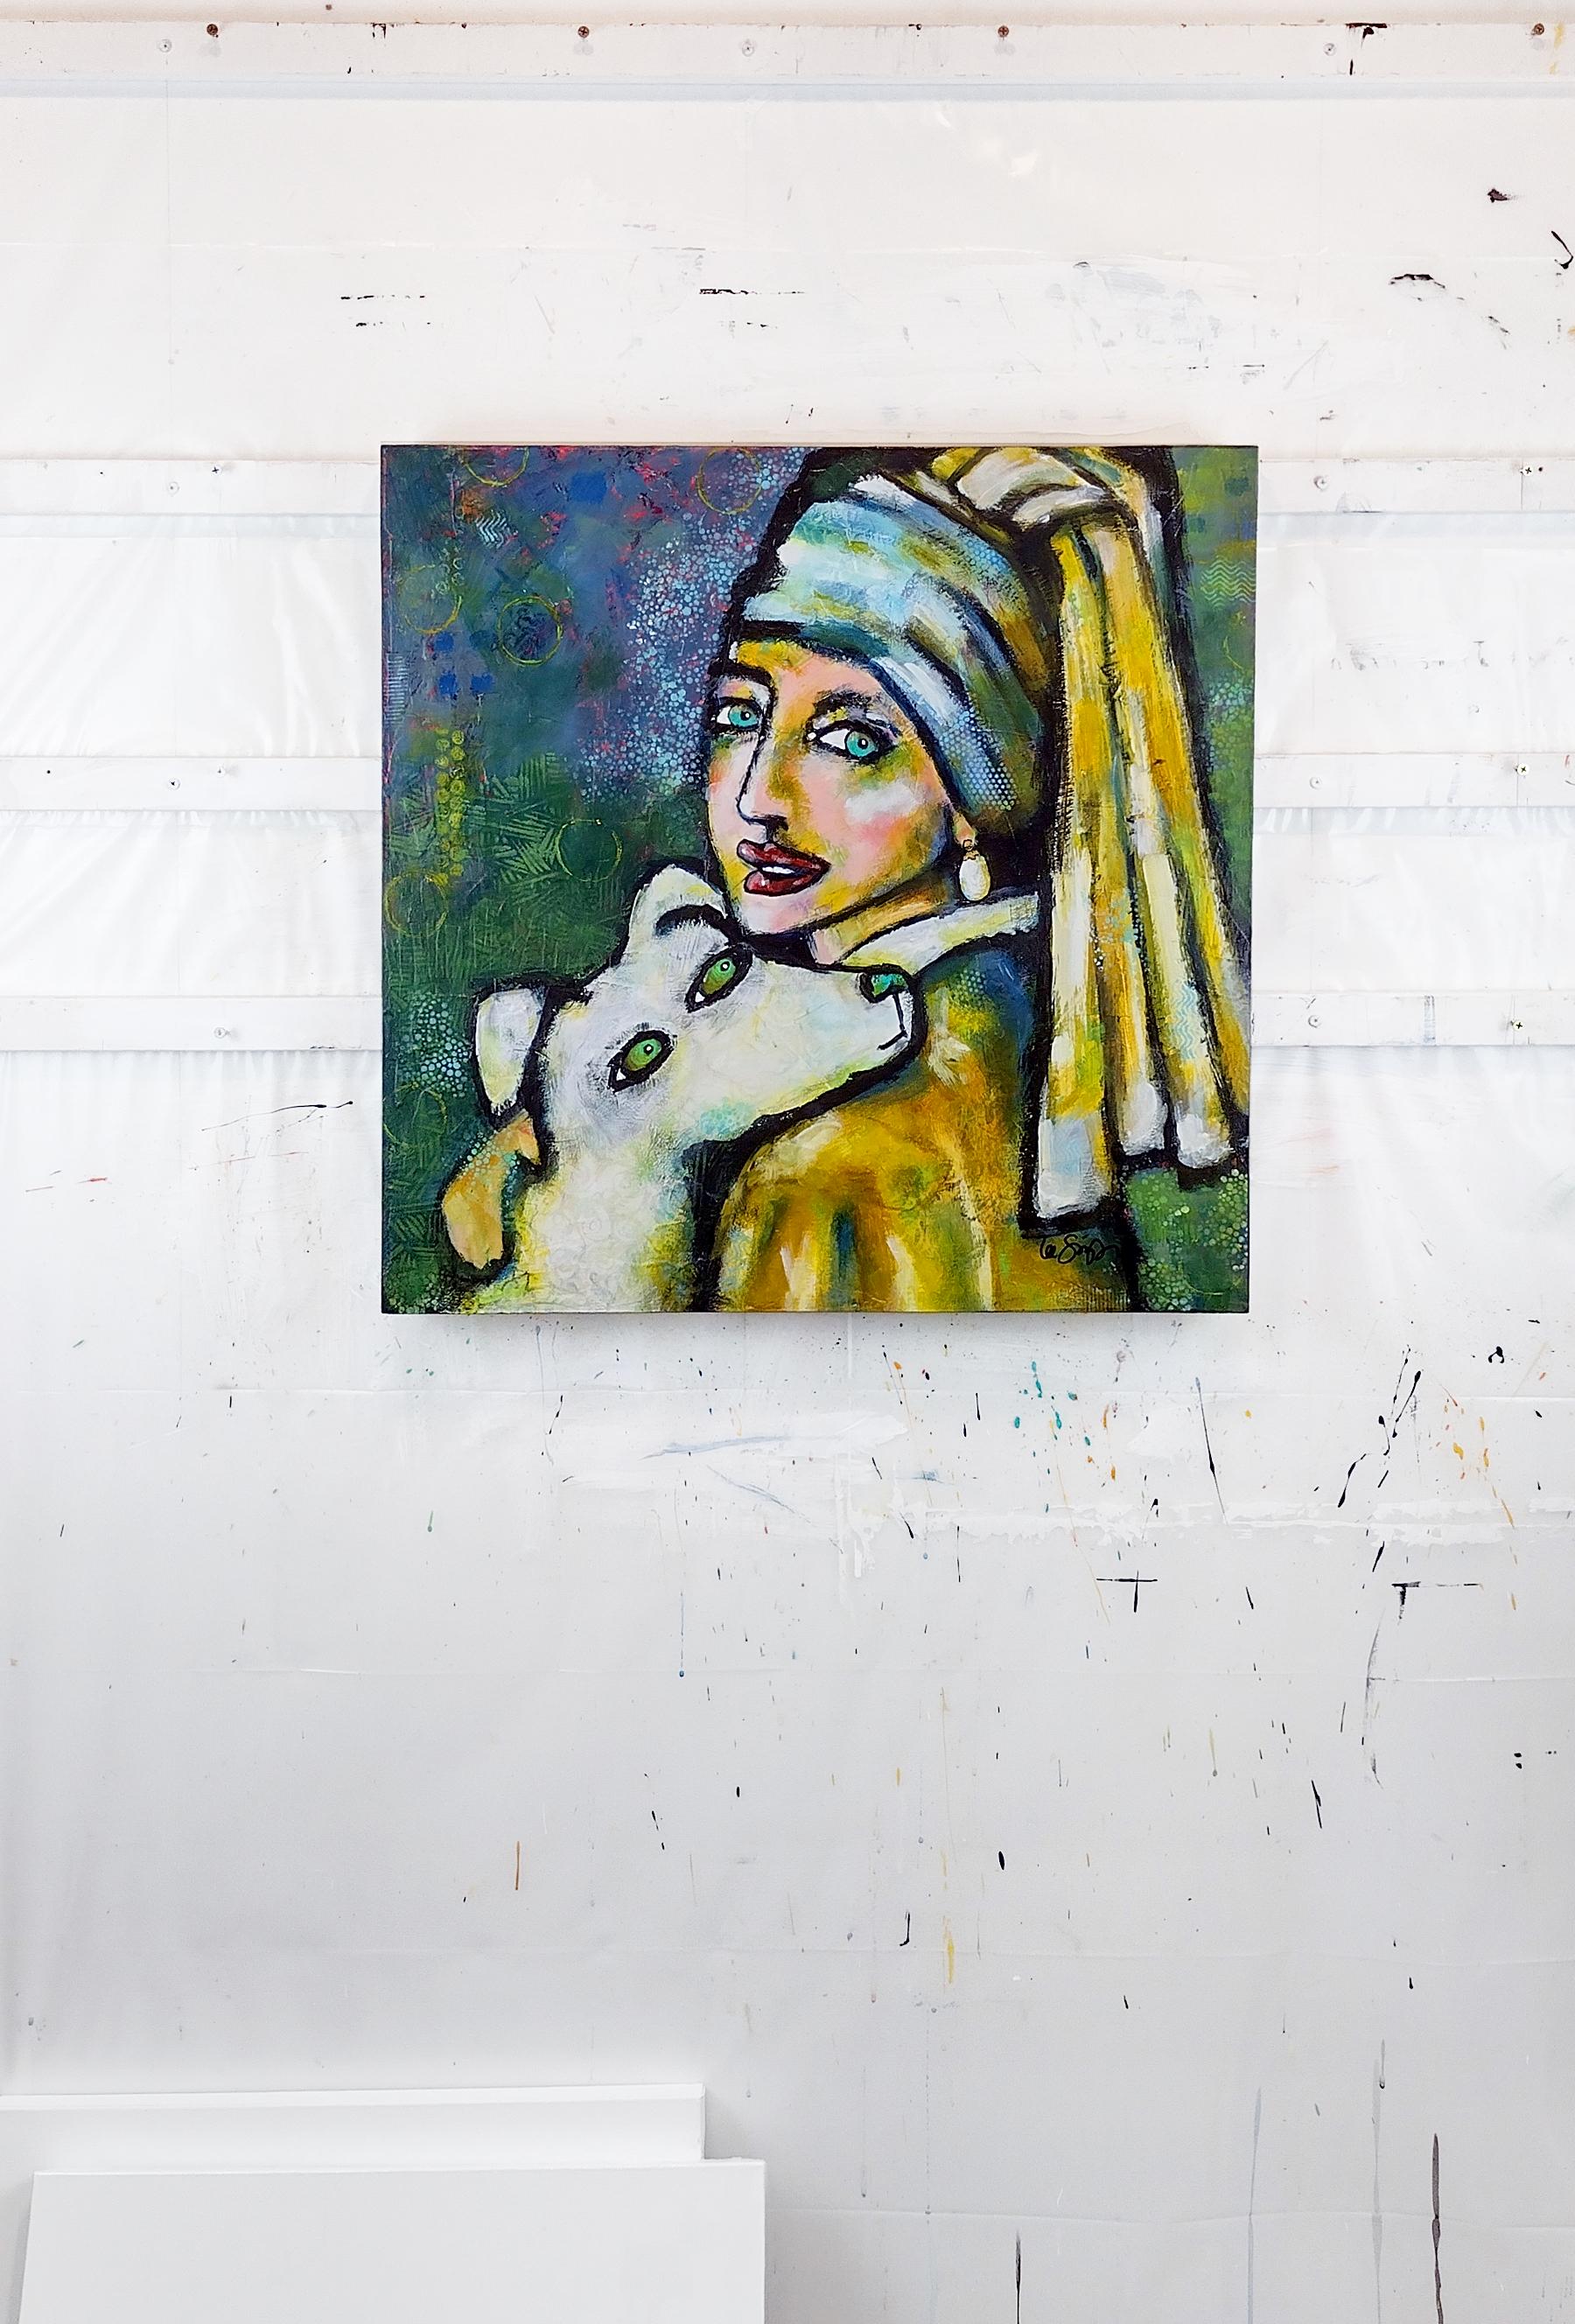 <p>Artist Comments<br>Taking inspiration from the famous Baroque painting, artist Lee Smith presents her spirited interpretation of Vermeer's masterpiece. In her playful rendition, she includes the mysterious model's favorite pet. Lee paints in the